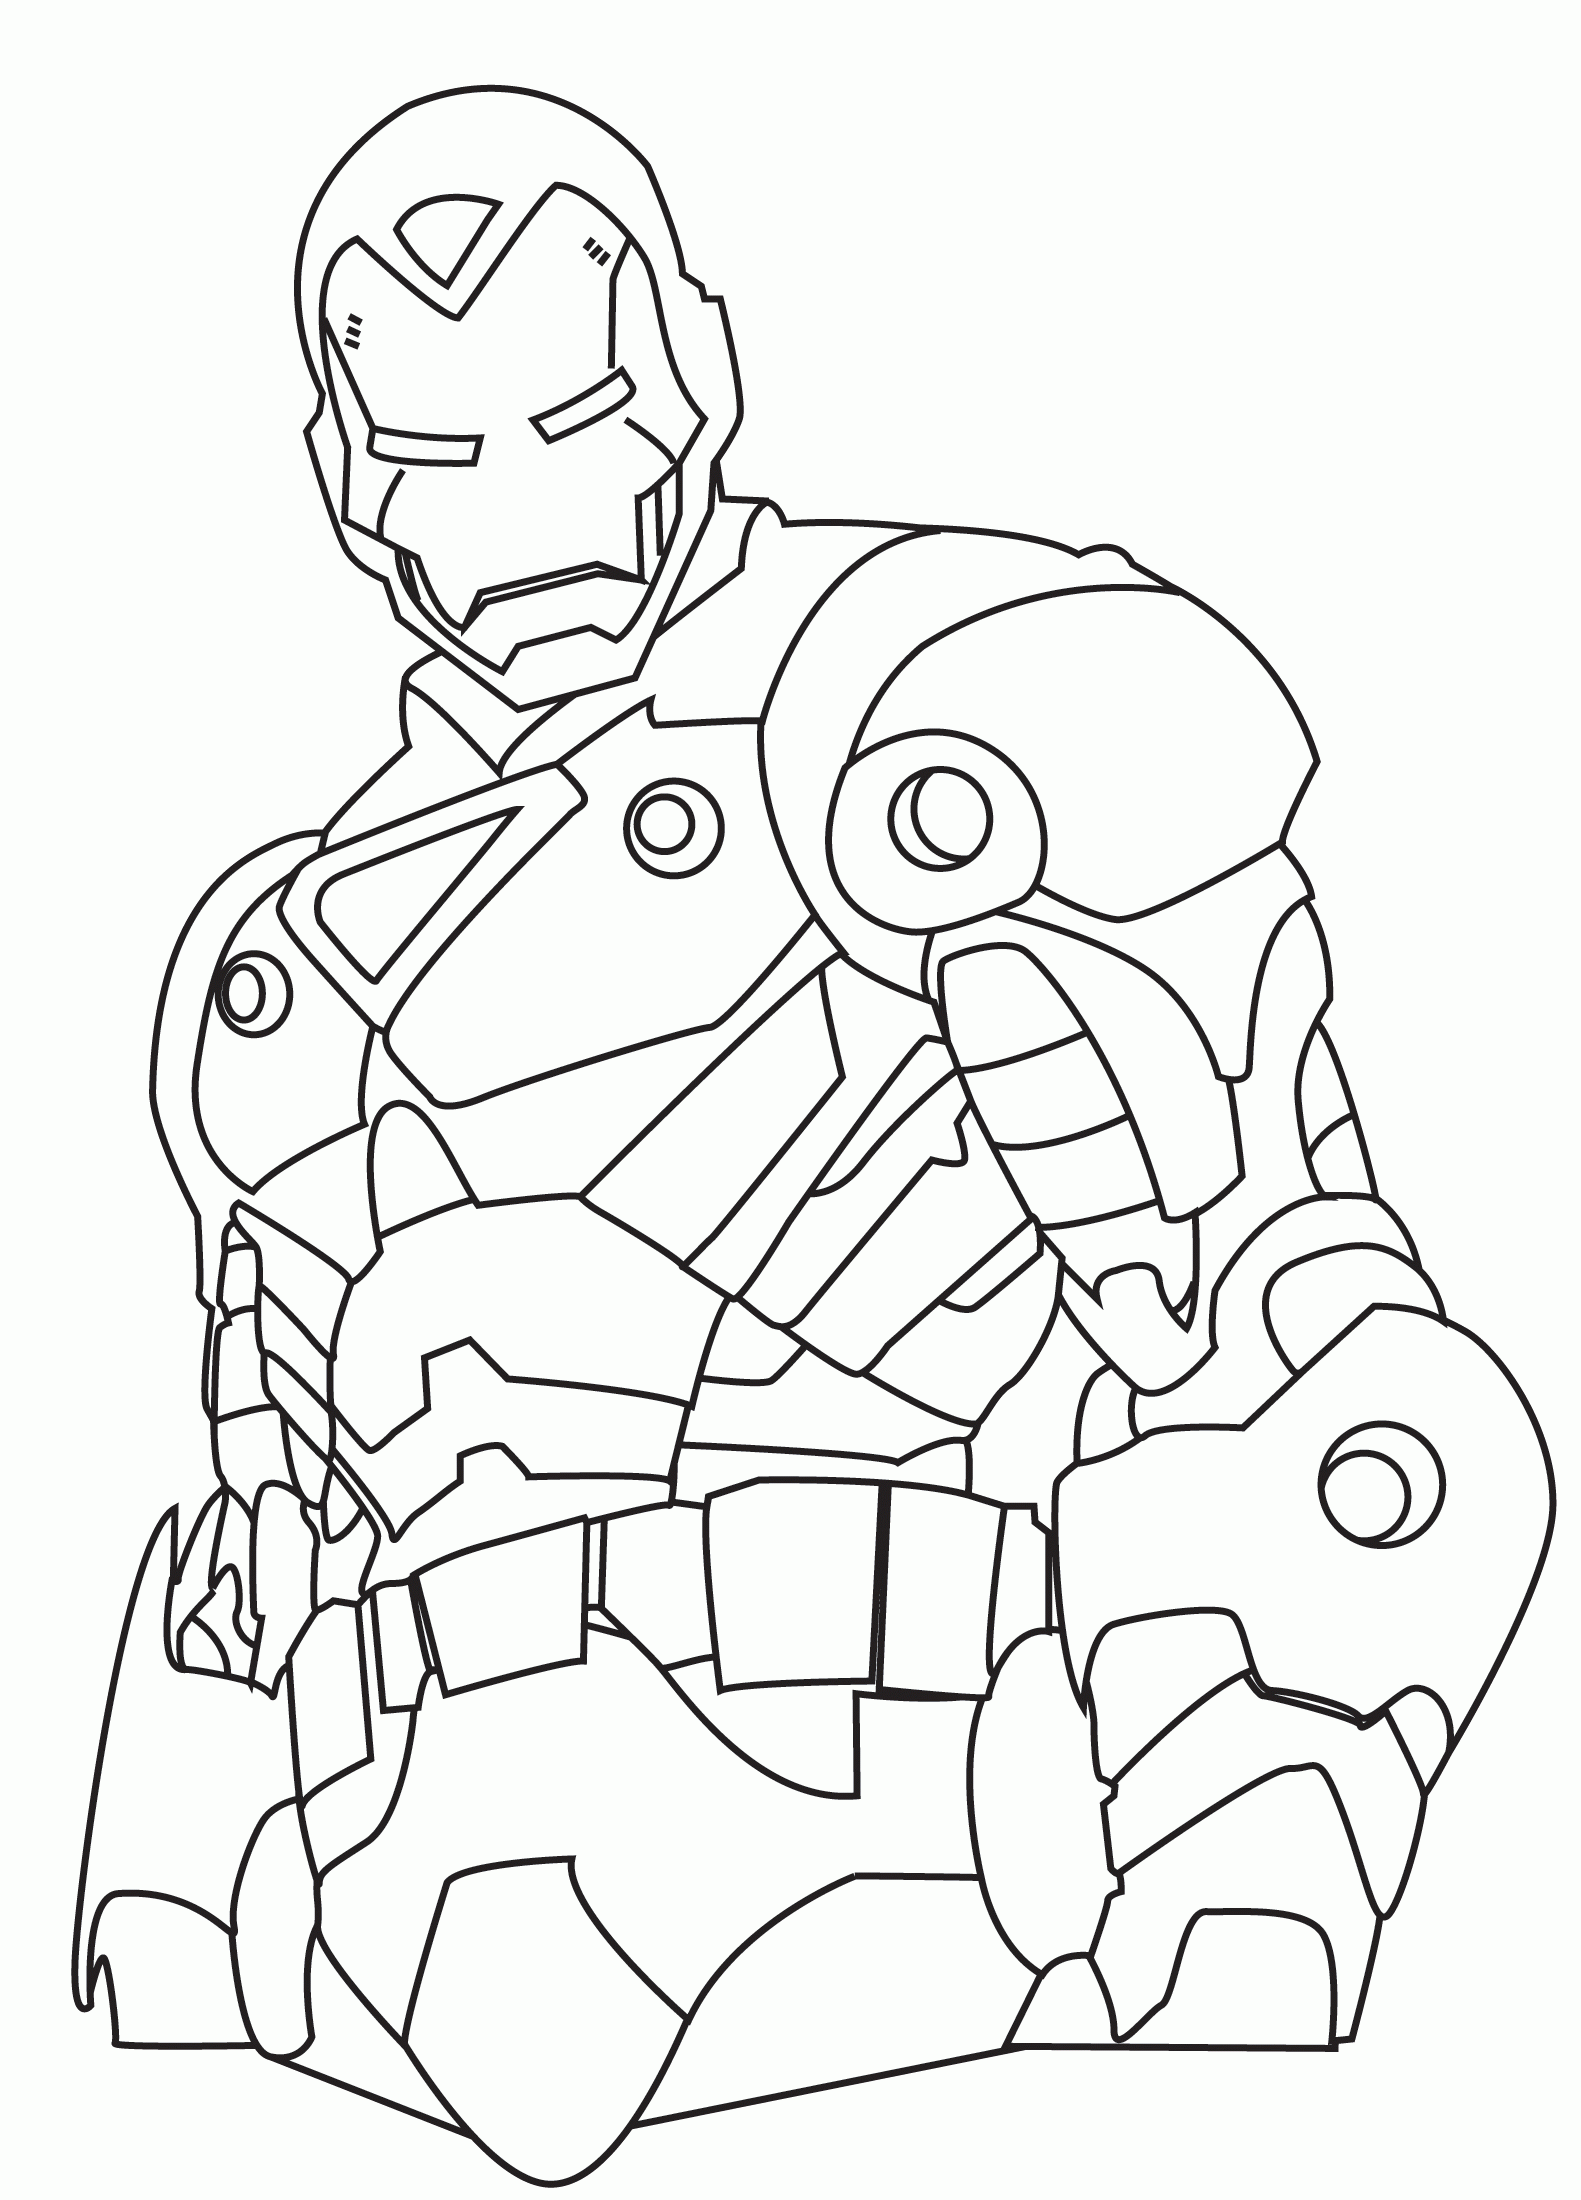 Iron Man to color : simple